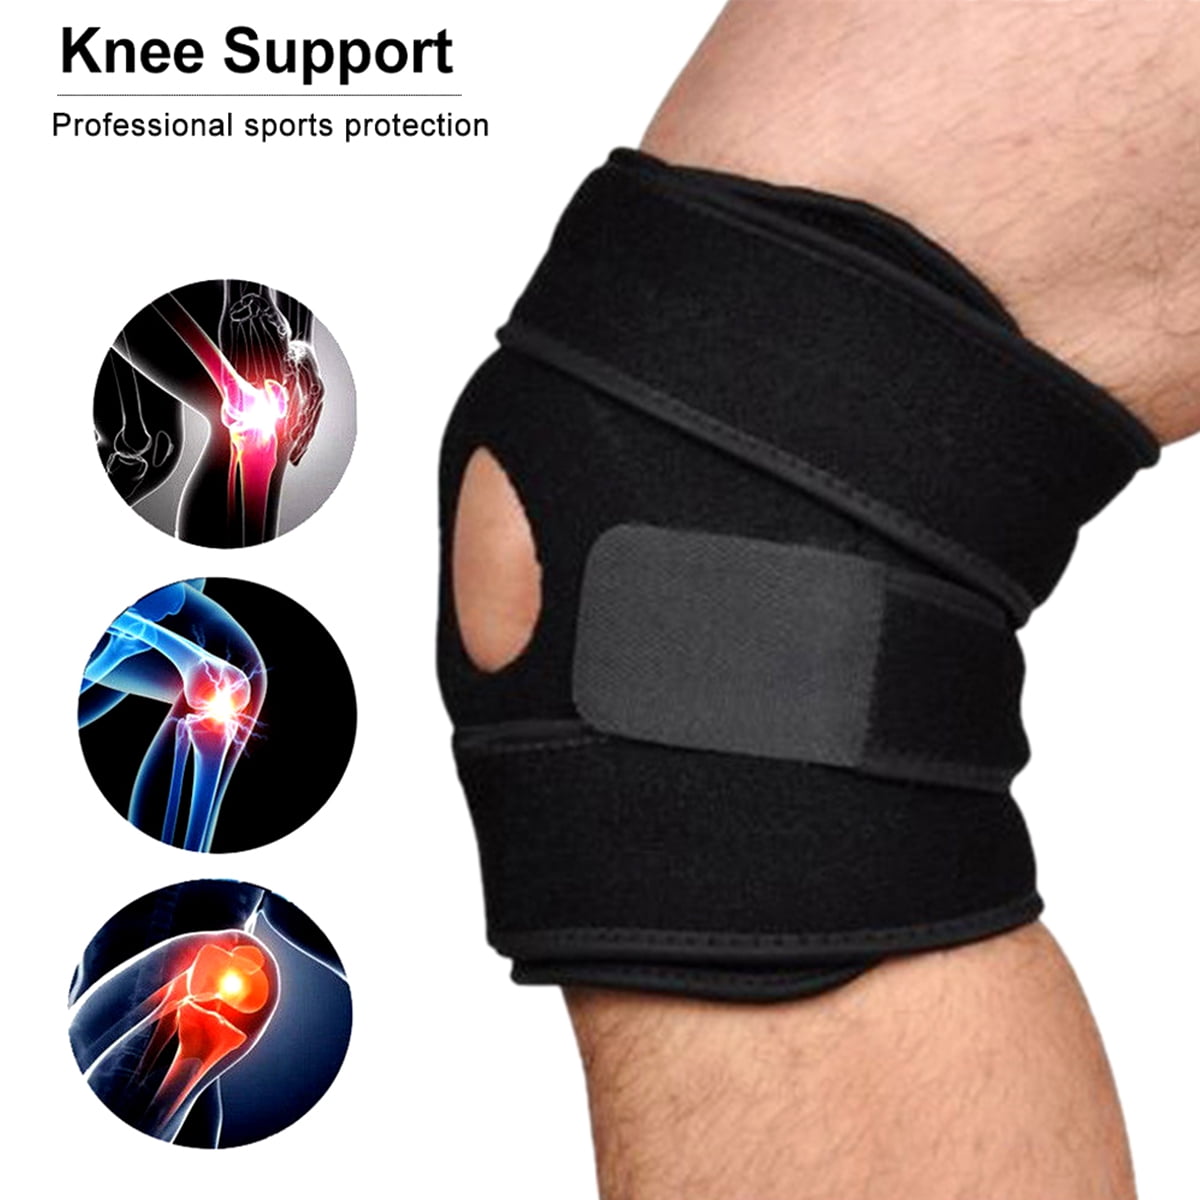 Unique Design for Extra Comfort Washable Knee Support Deluxe Comfort Aid 